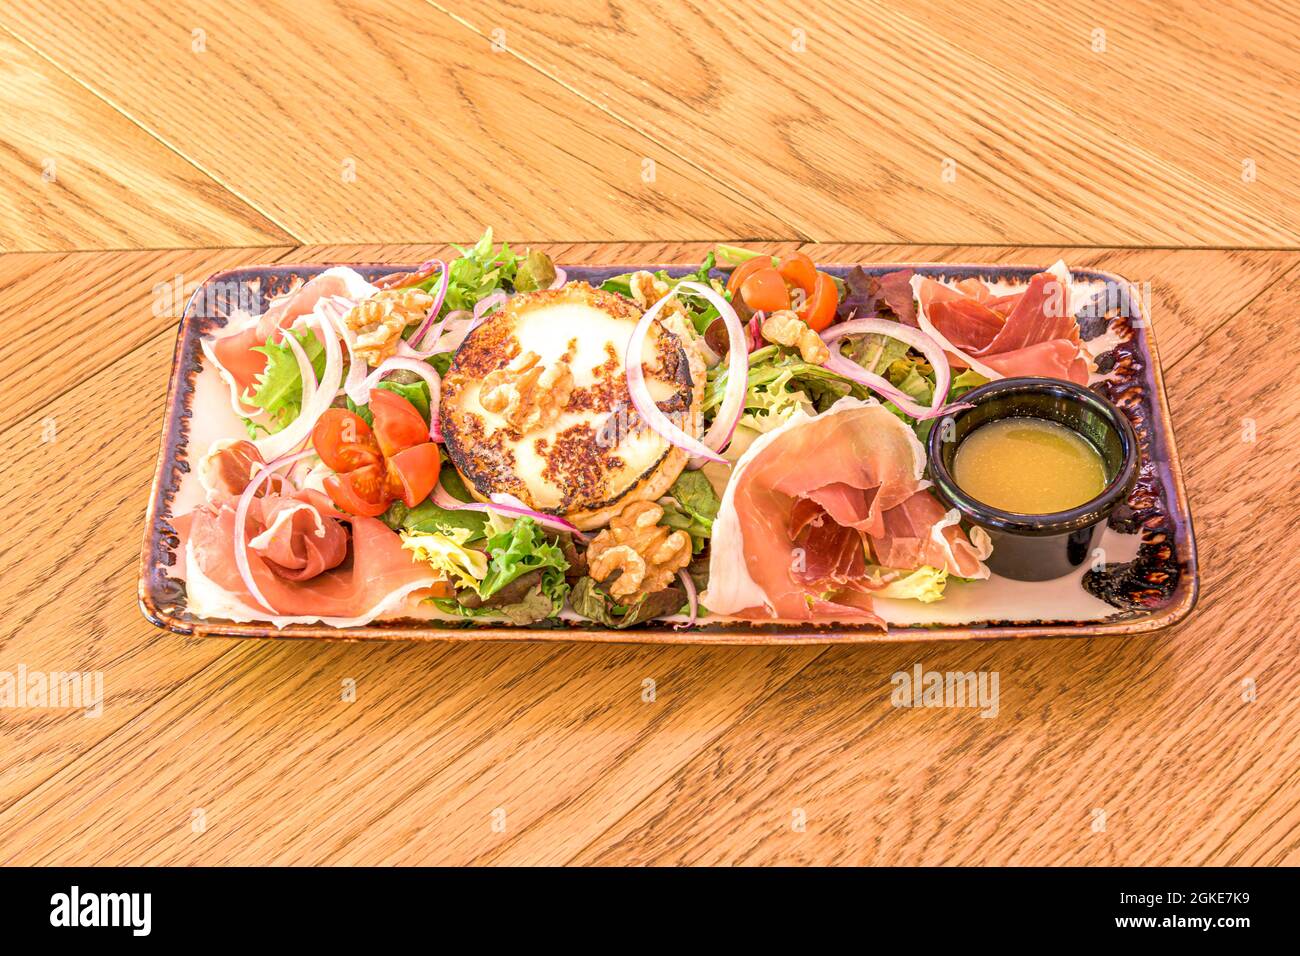 Goat cheese salad, with walnuts, slices of Serrano ham, lettuce and cherry tomatoes, red onion on porcelain tray Stock Photo